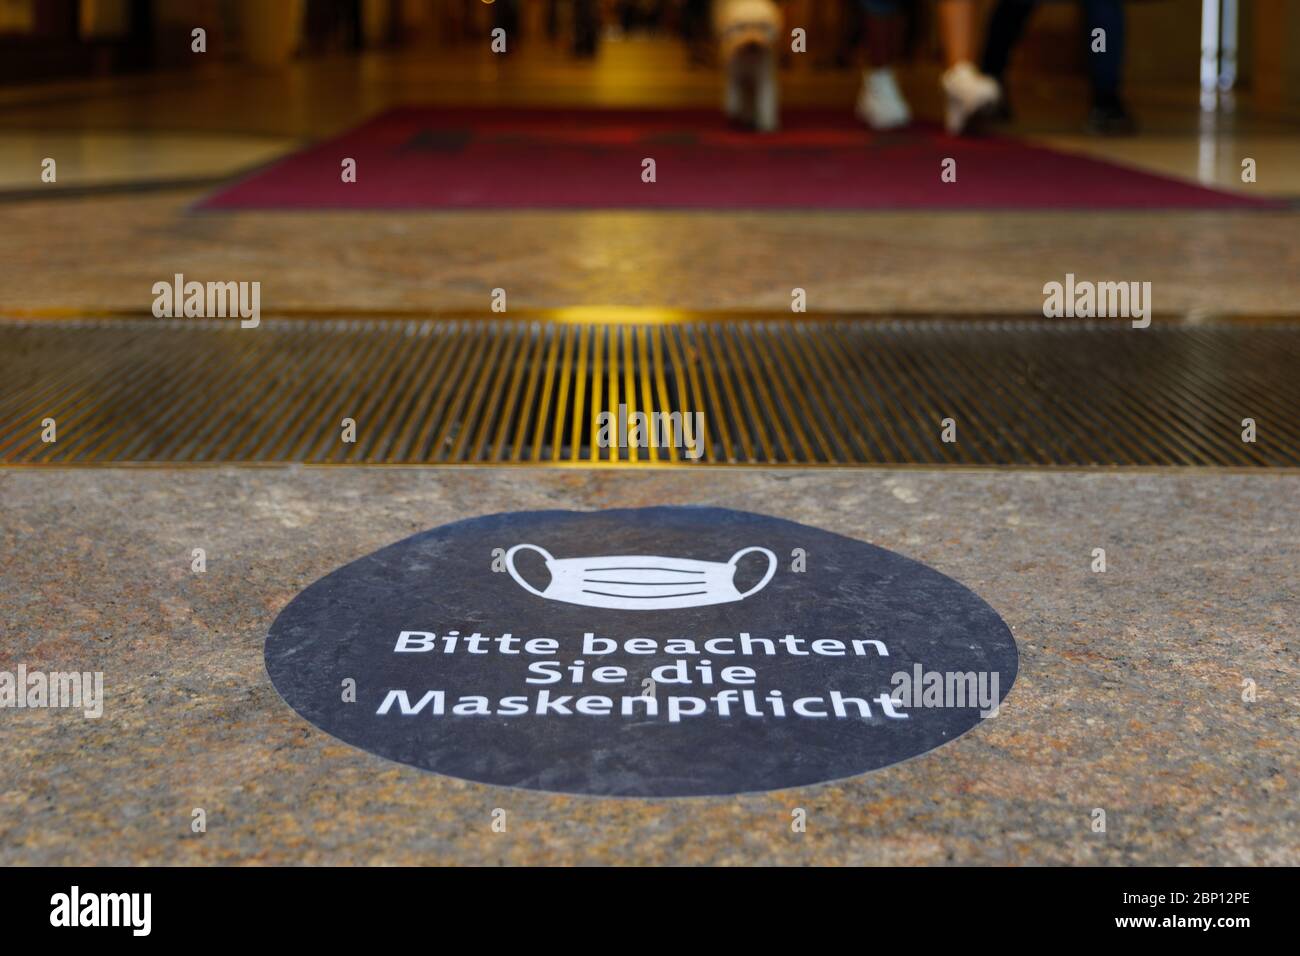 White face mask symbol and text with ' Bitte beachten Sie die Maskenpflicht ' means ' Please pay attention to the mask', sign on the floor in Germany. Stock Photo